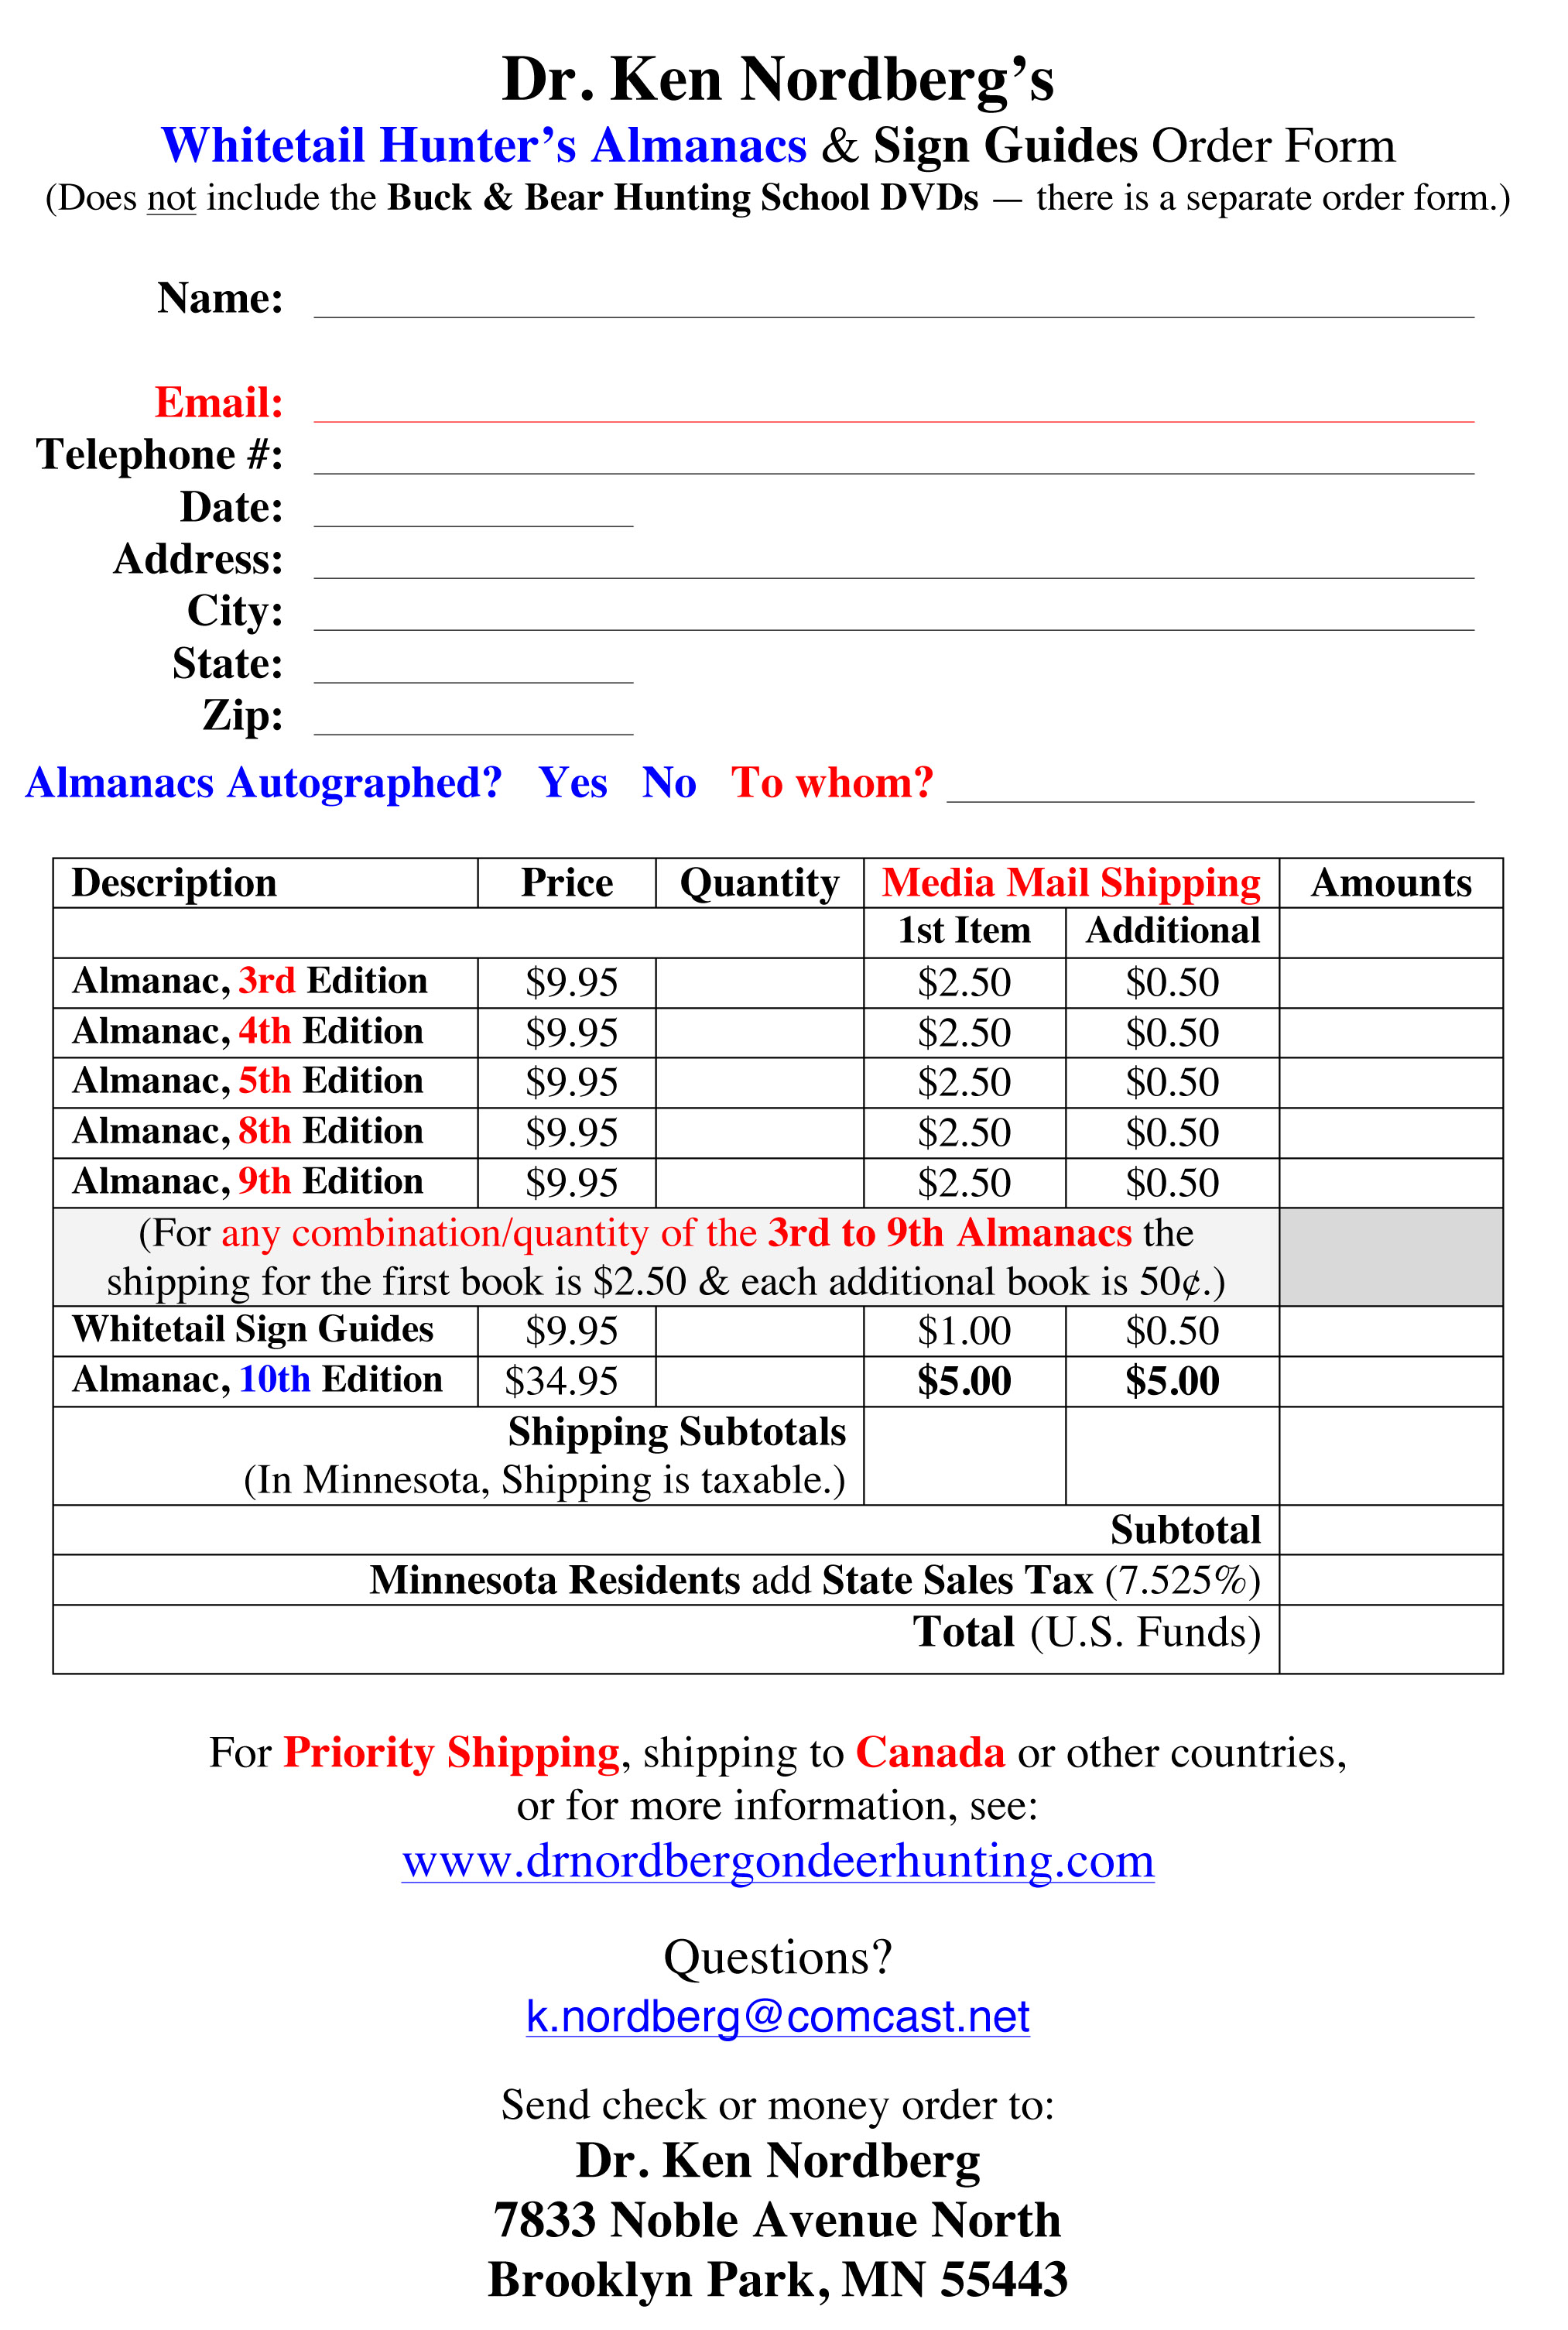 Order form for purchasing Whitetail Hunter\'s Alamanacs and Sign Guides from Dr. Ken Nordberg